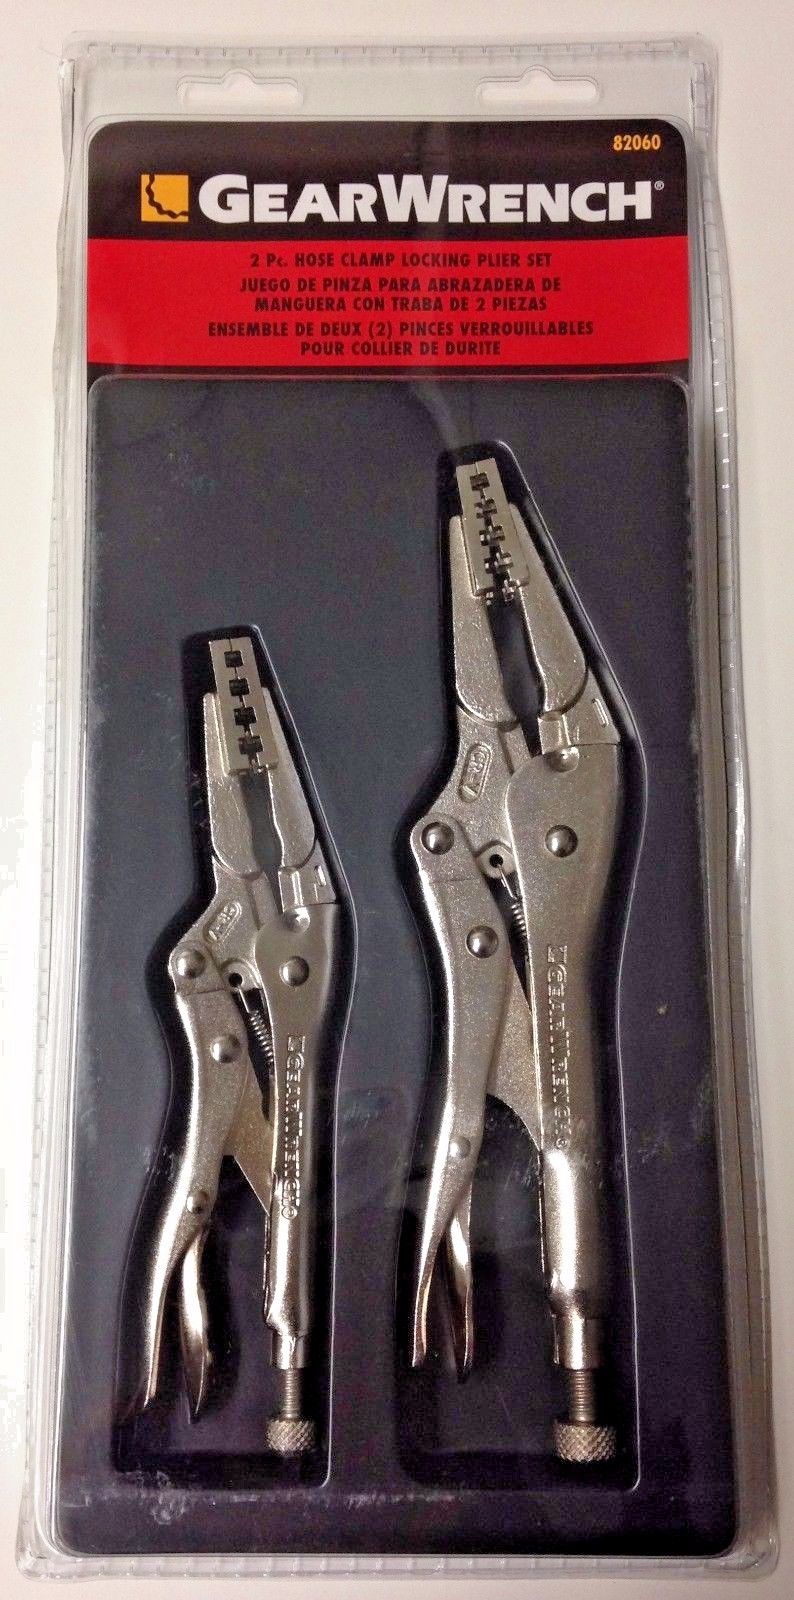 Gearwrench 82060 2 Piece Locking Hose Clamp Pliers Set 7" & 9"